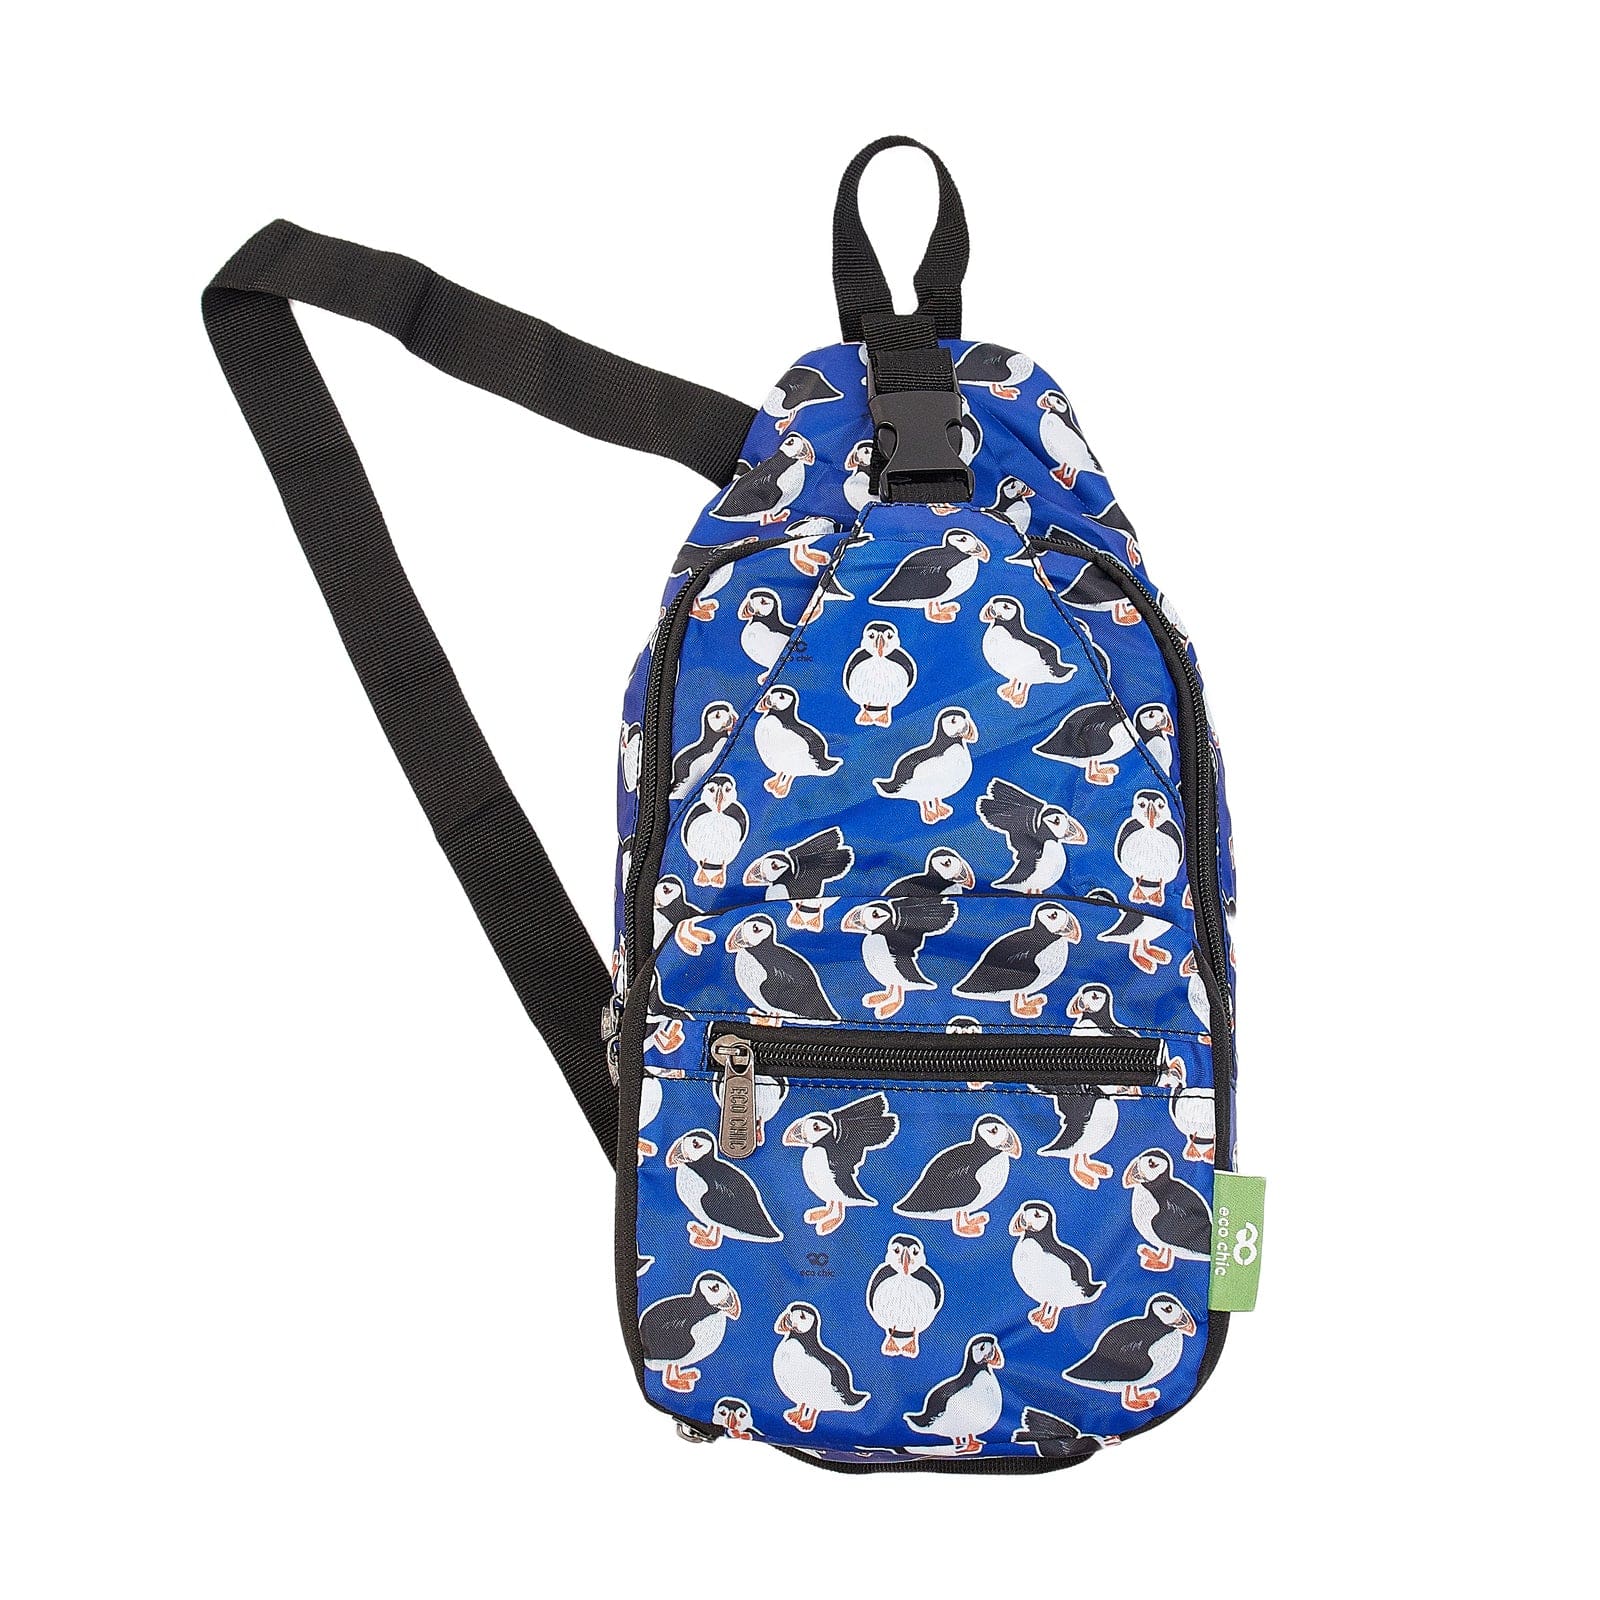 Eco Chic Blue Eco Chic Lightweight Foldable Crossbody Bag Puffin